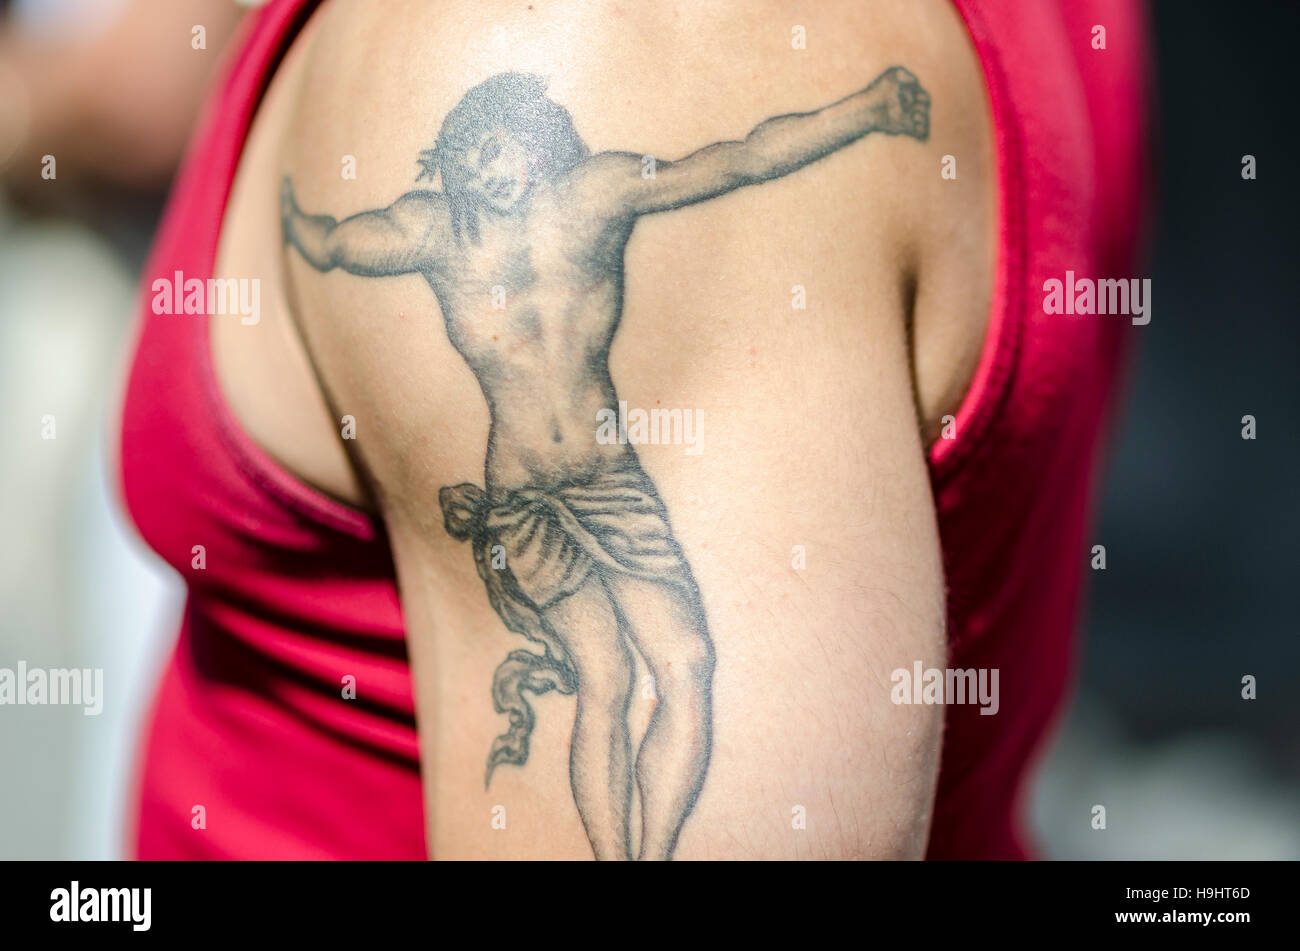 RIO DE JANEIRO - FEBRUARY 28, 2016: A young carioca Brazilian man shows off a large tattoo of Jesus Christ in a crucifixion. Stock Photo